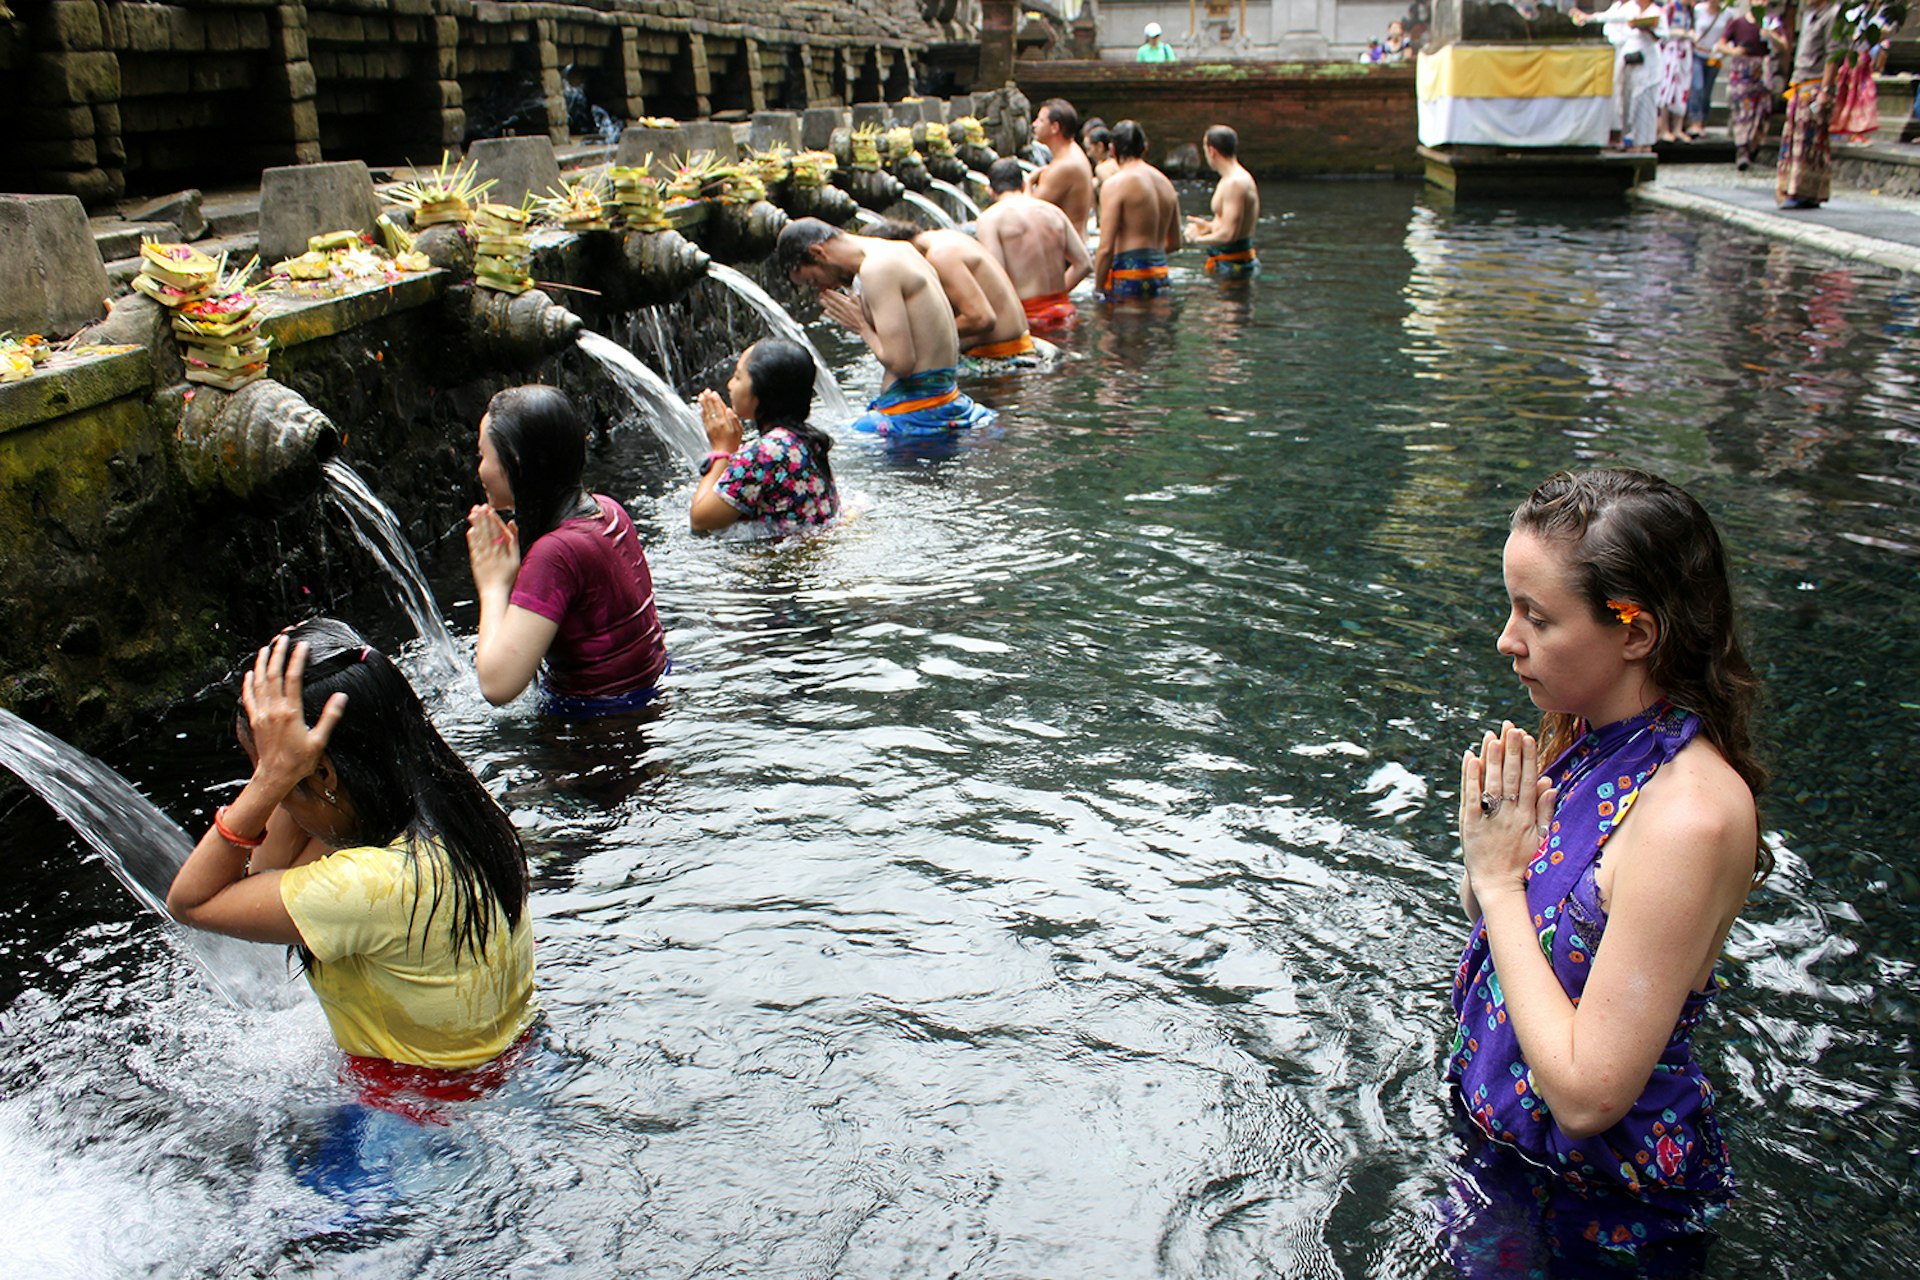 The holy bathing site of Tirta Empul Temple. Image by Samantha Chalker / Lonely Planet